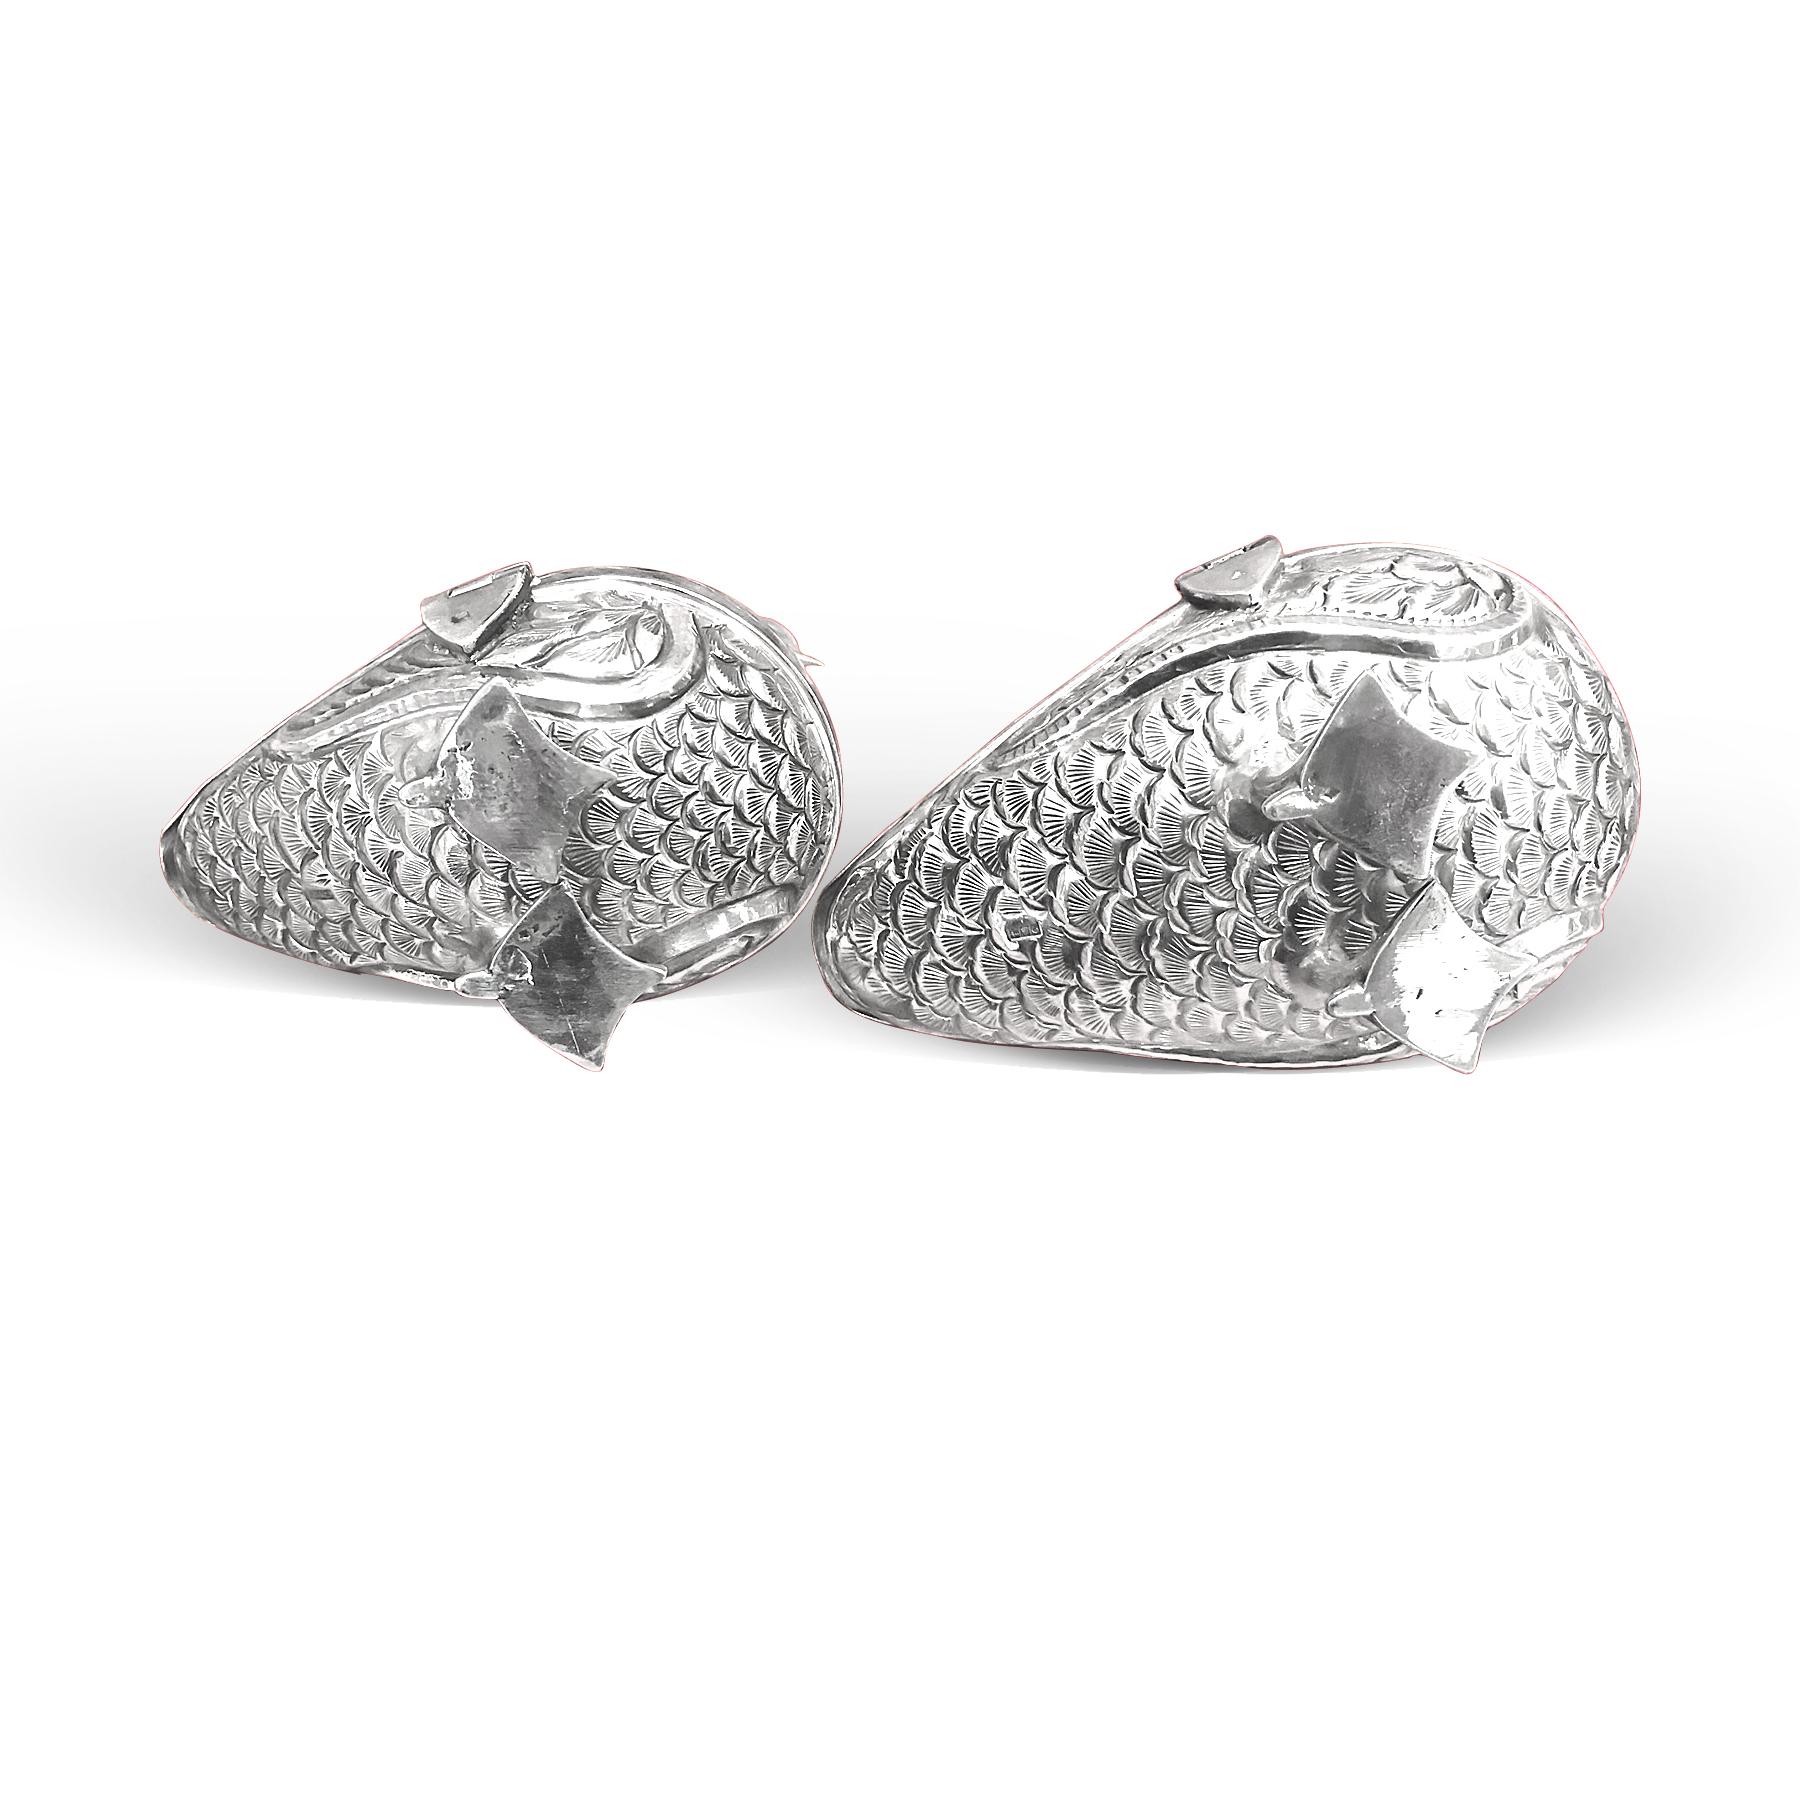 ONE PAIR OF STERLING SILVER  FIGURINES DUCK, Hand Made For Sale 3